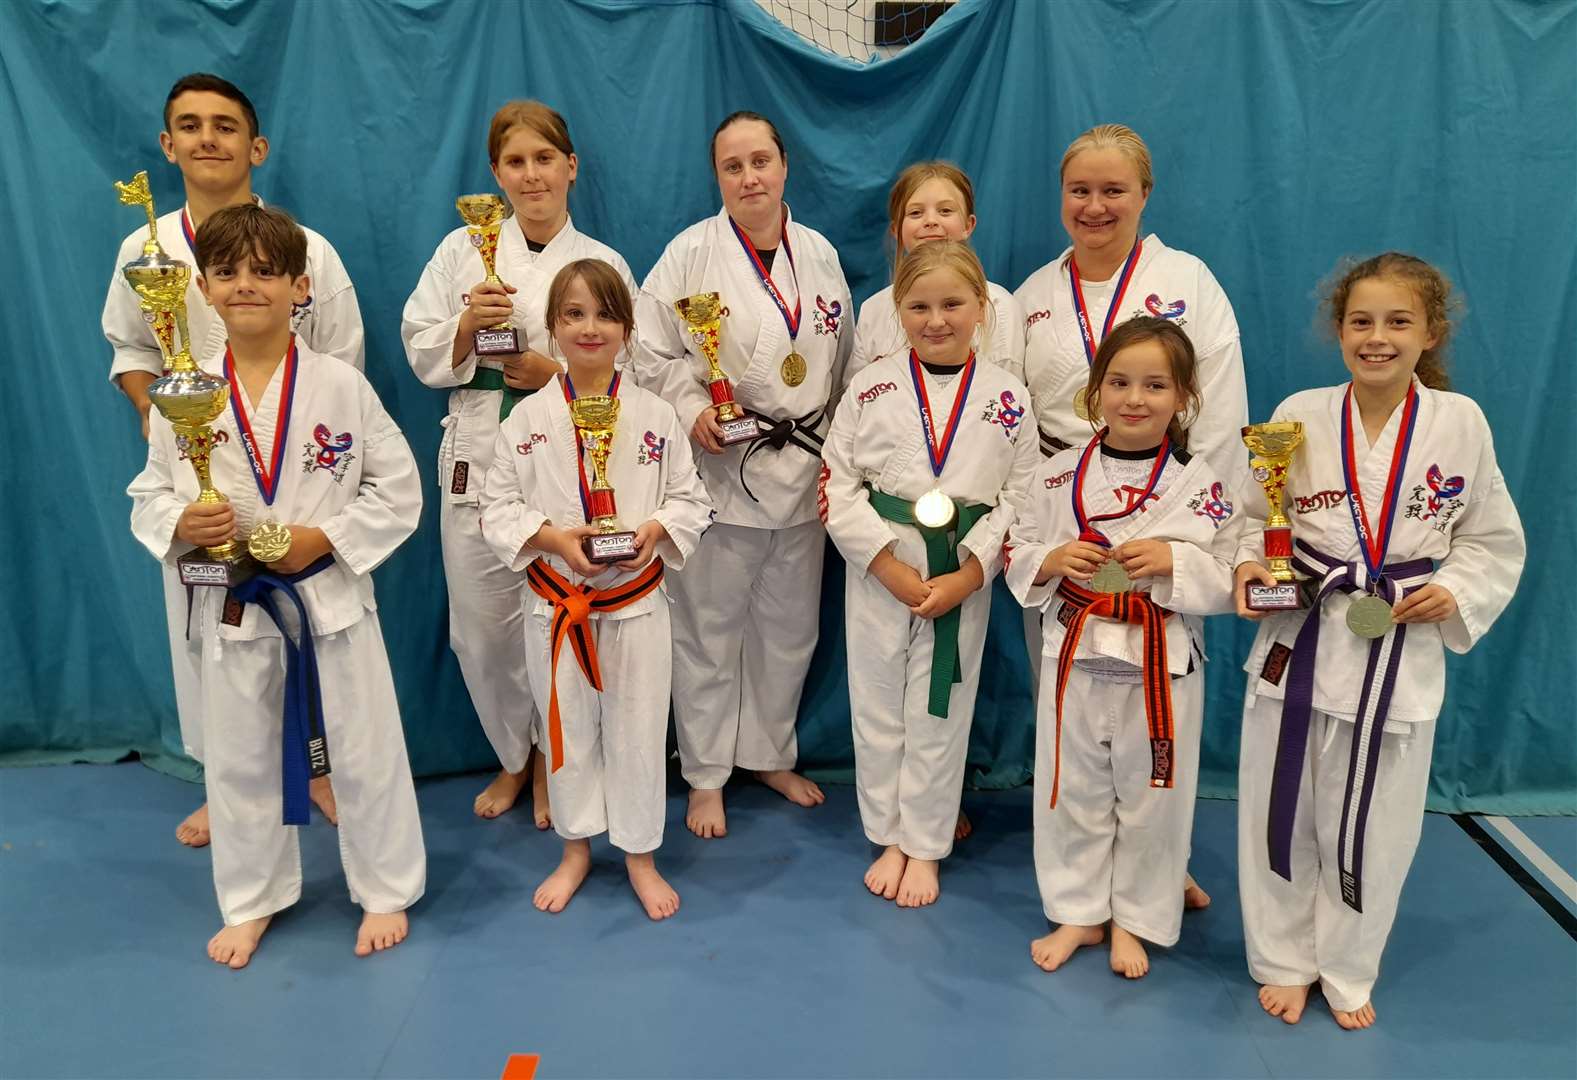 The Folkestone branch of Canton Martial Arts impressed at the Canton Black Belt Academy National Karate Championships in Eastbourne, with national titles for Rexford Brock, Casper Brock and Amelia Heskett-Down